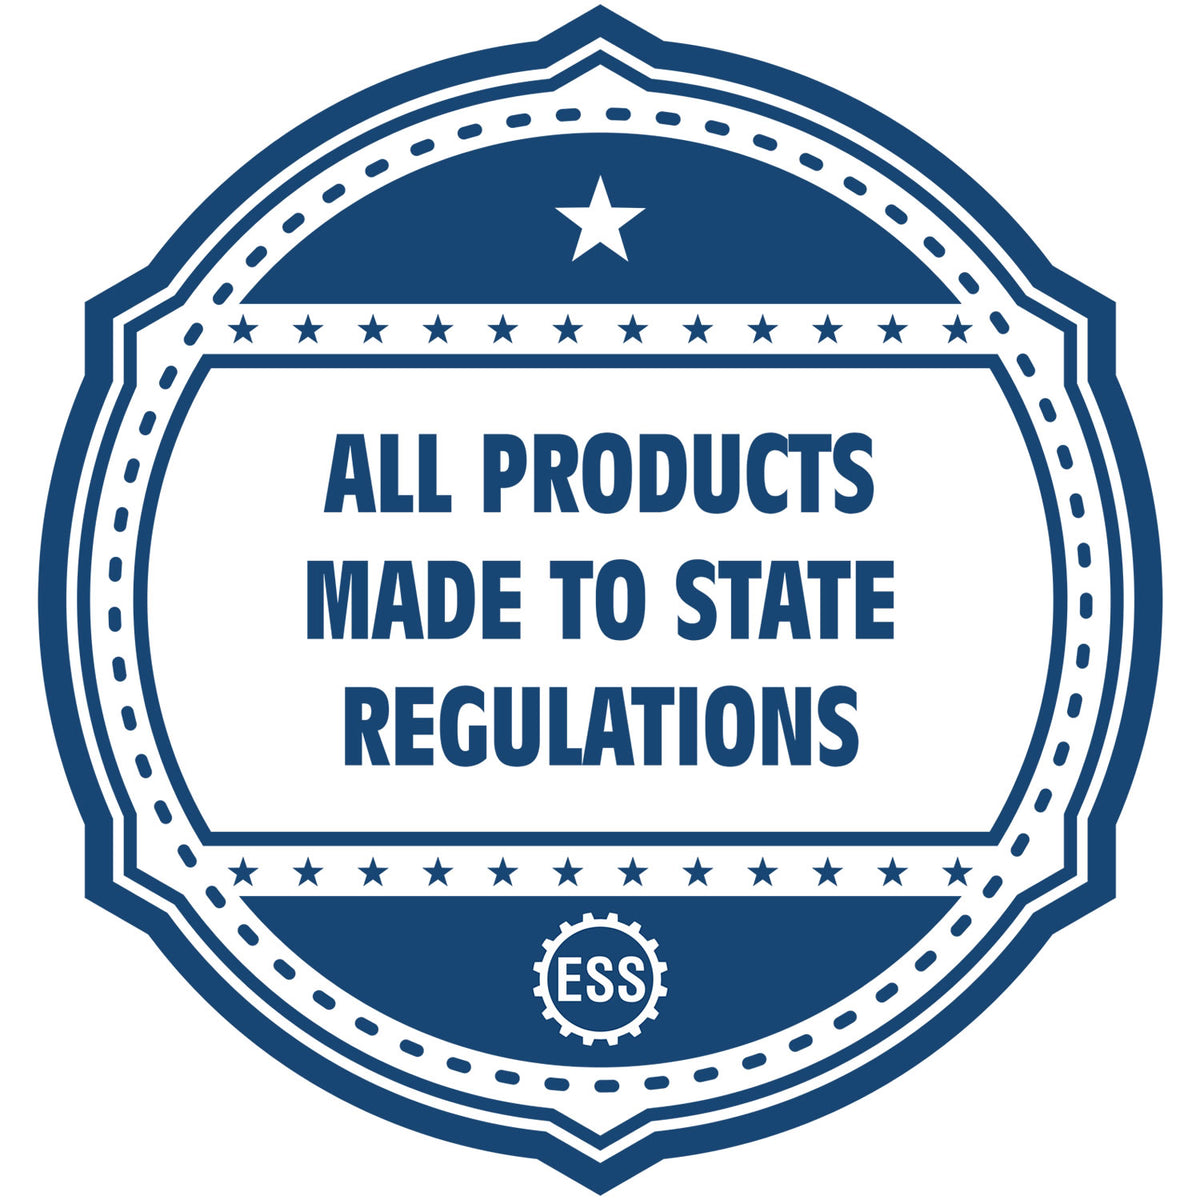 A blue icon or badge for the Self-Inking Idaho Geologist Stamp showing that this product is made in compliance with state regulations.